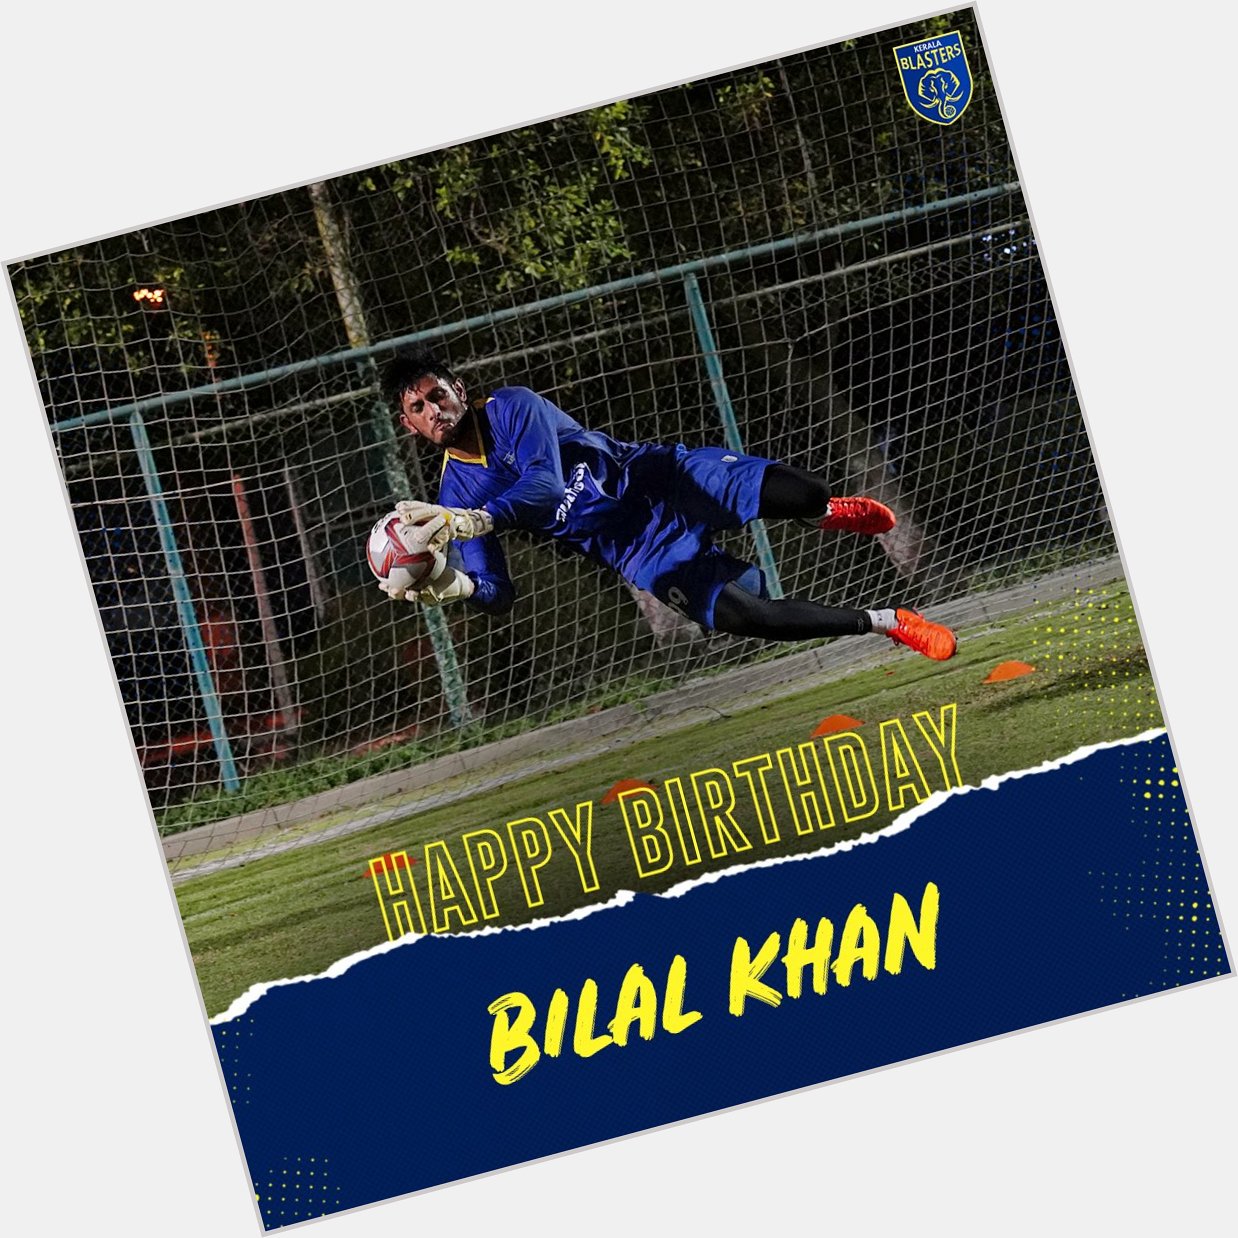 Here\s wishing our shot-stopper, Bilal Khan, a very Happy birthday!  